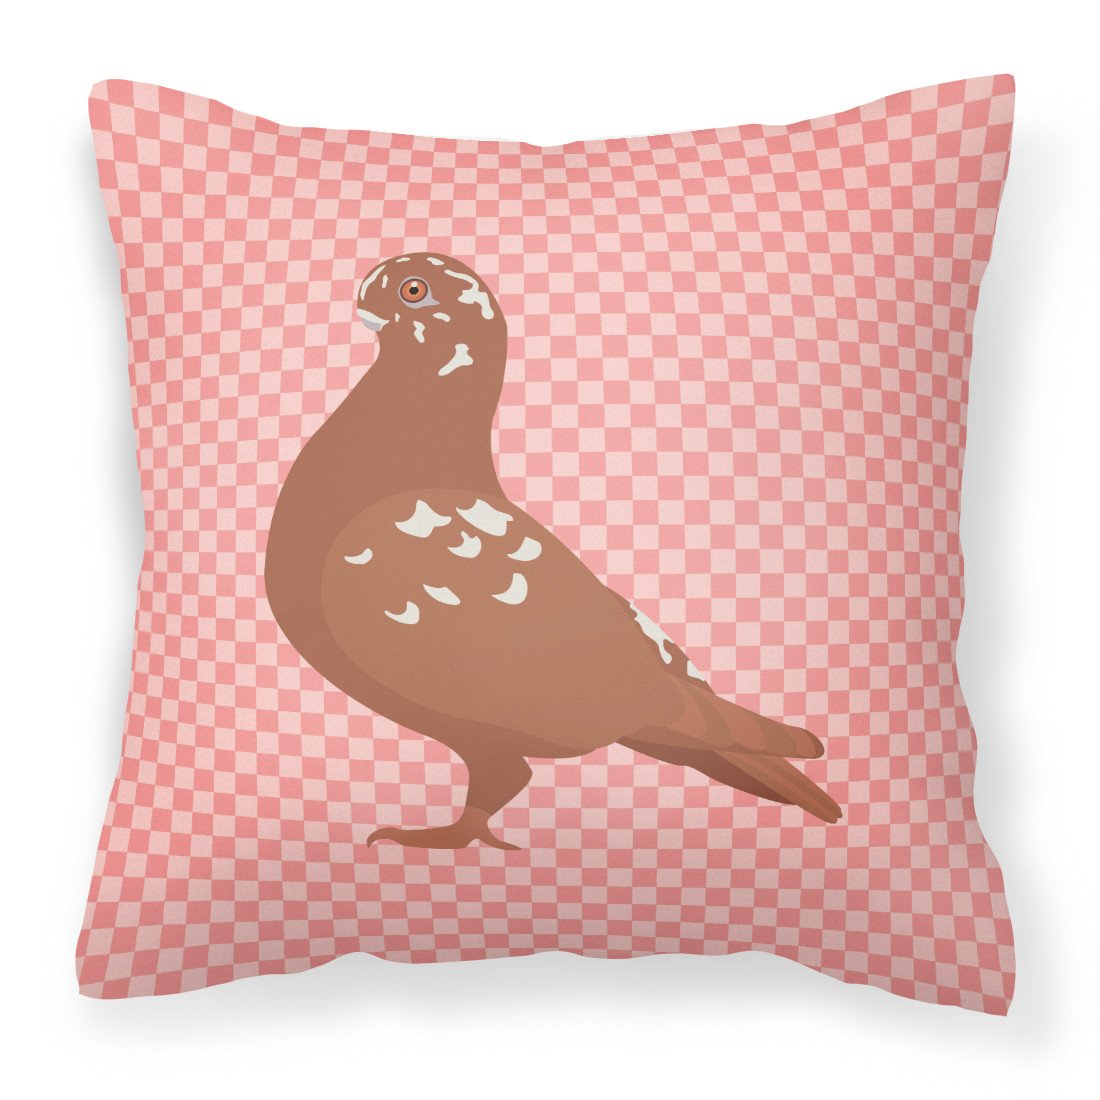 African Owl Pigeon Pink Check Fabric Decorative Pillow BB7953PW1818 by Caroline's Treasures